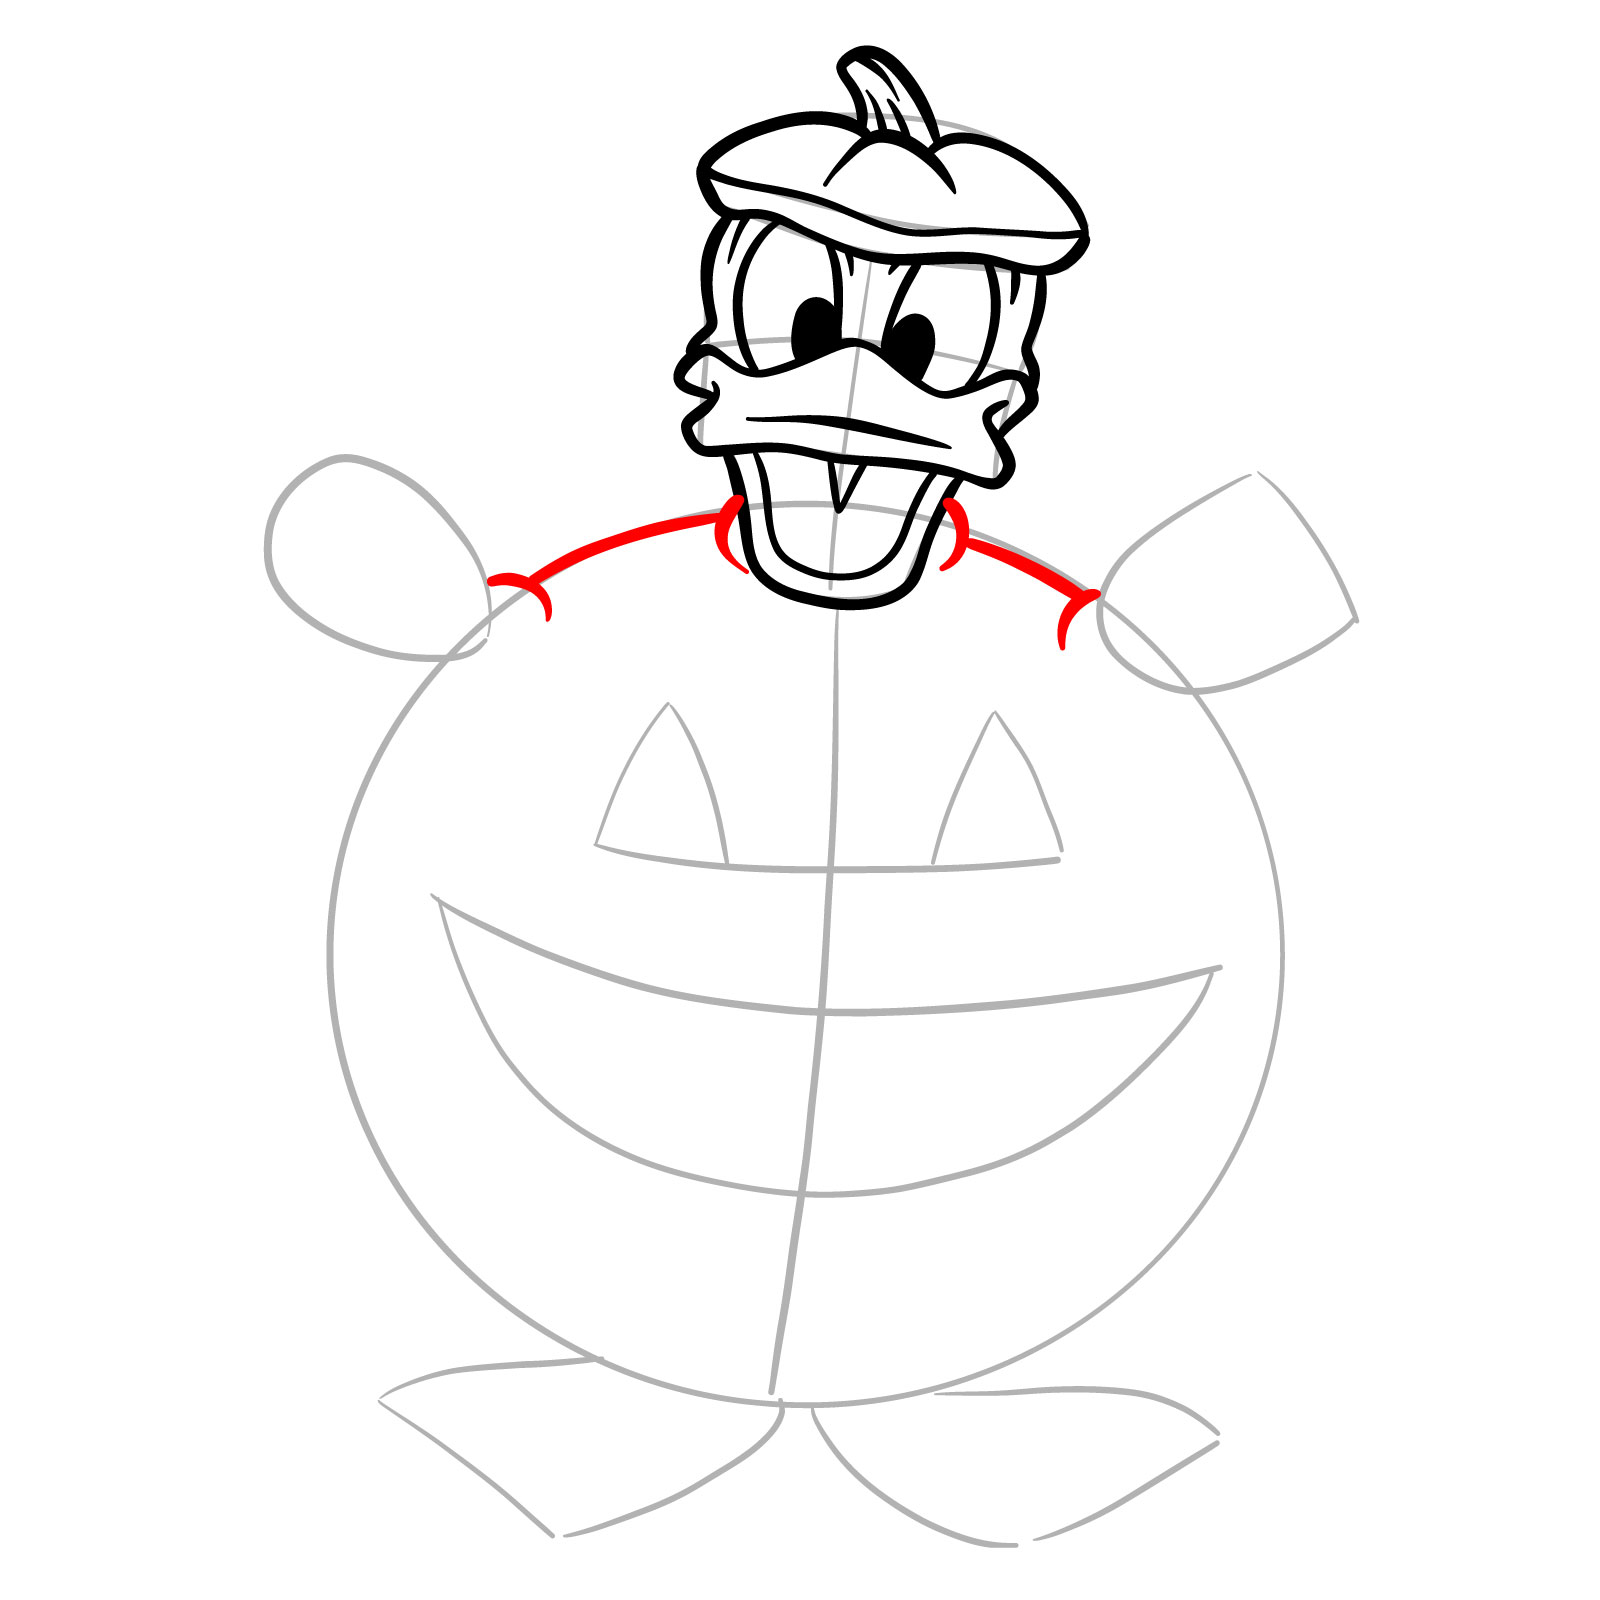 How to draw Halloween Donald Duck in a jack o'lantern - step 13